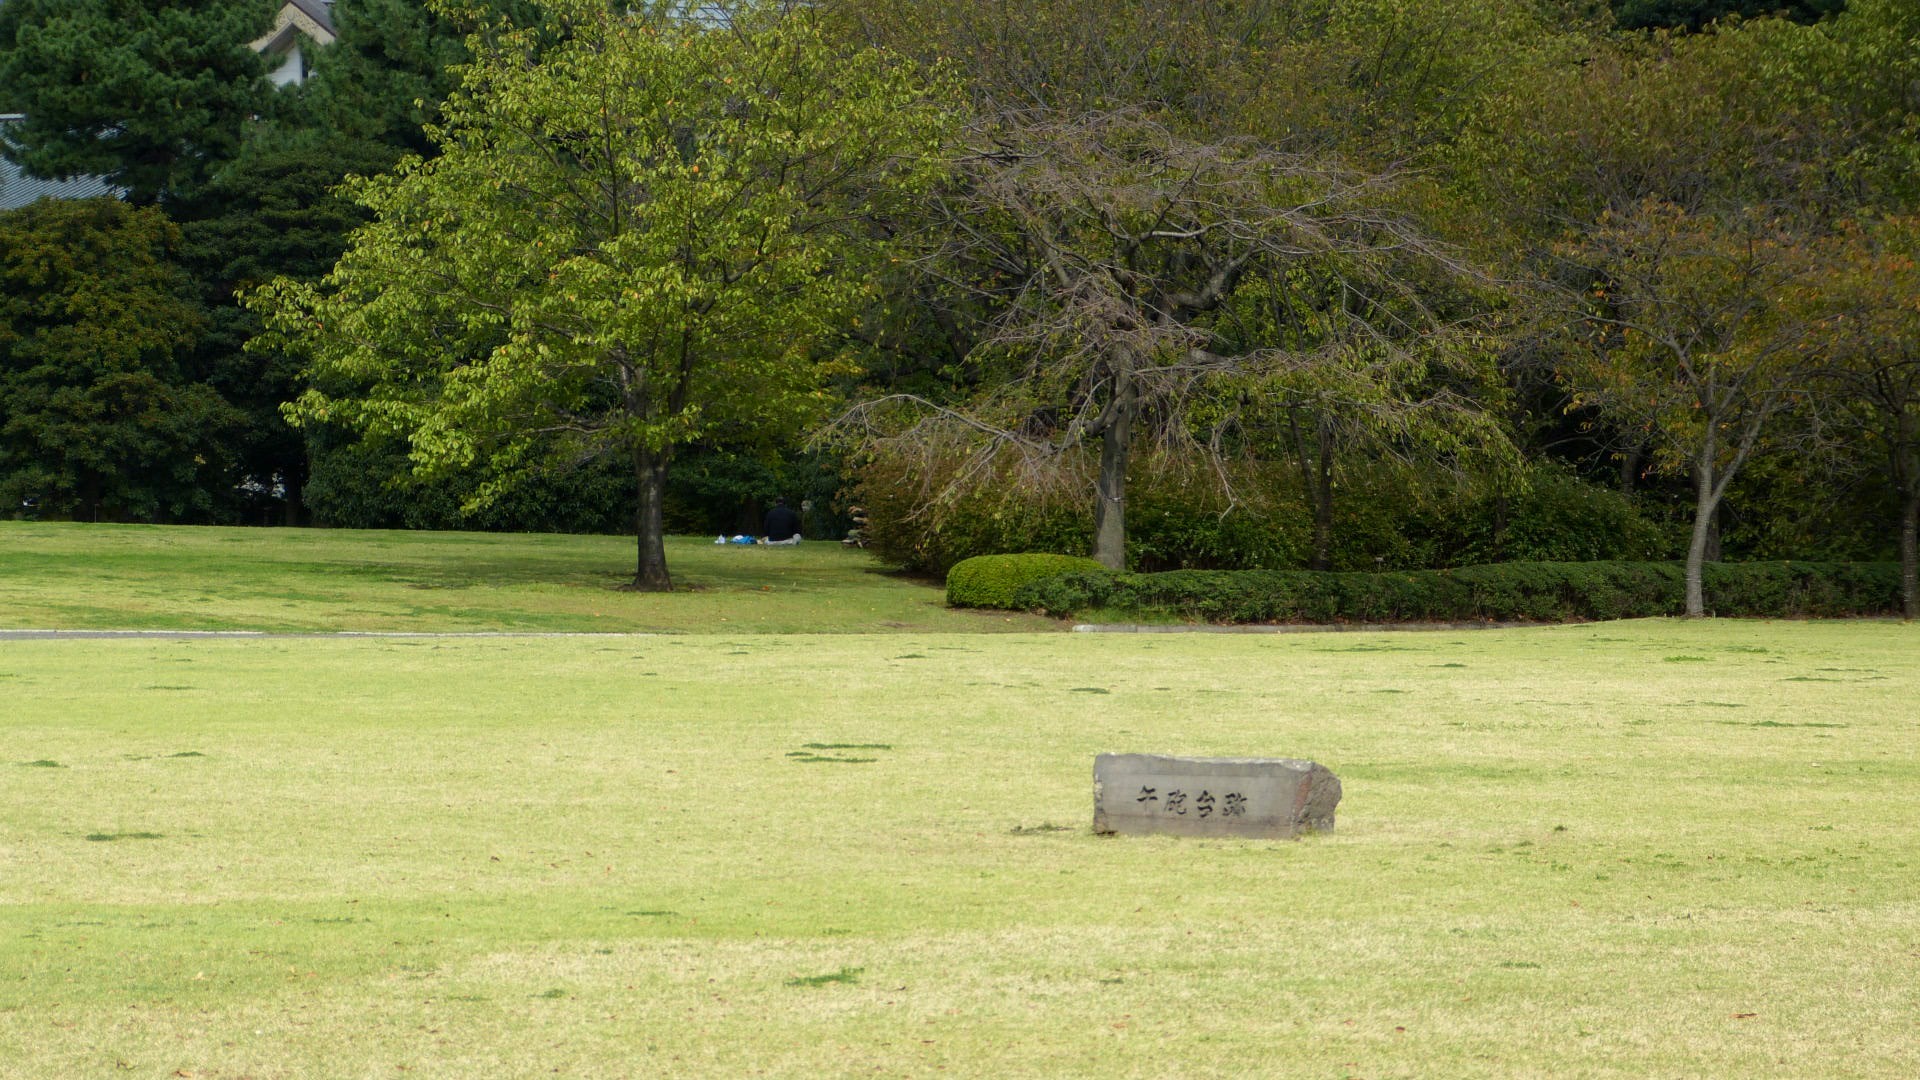 a flat grassy area with trees in the distance